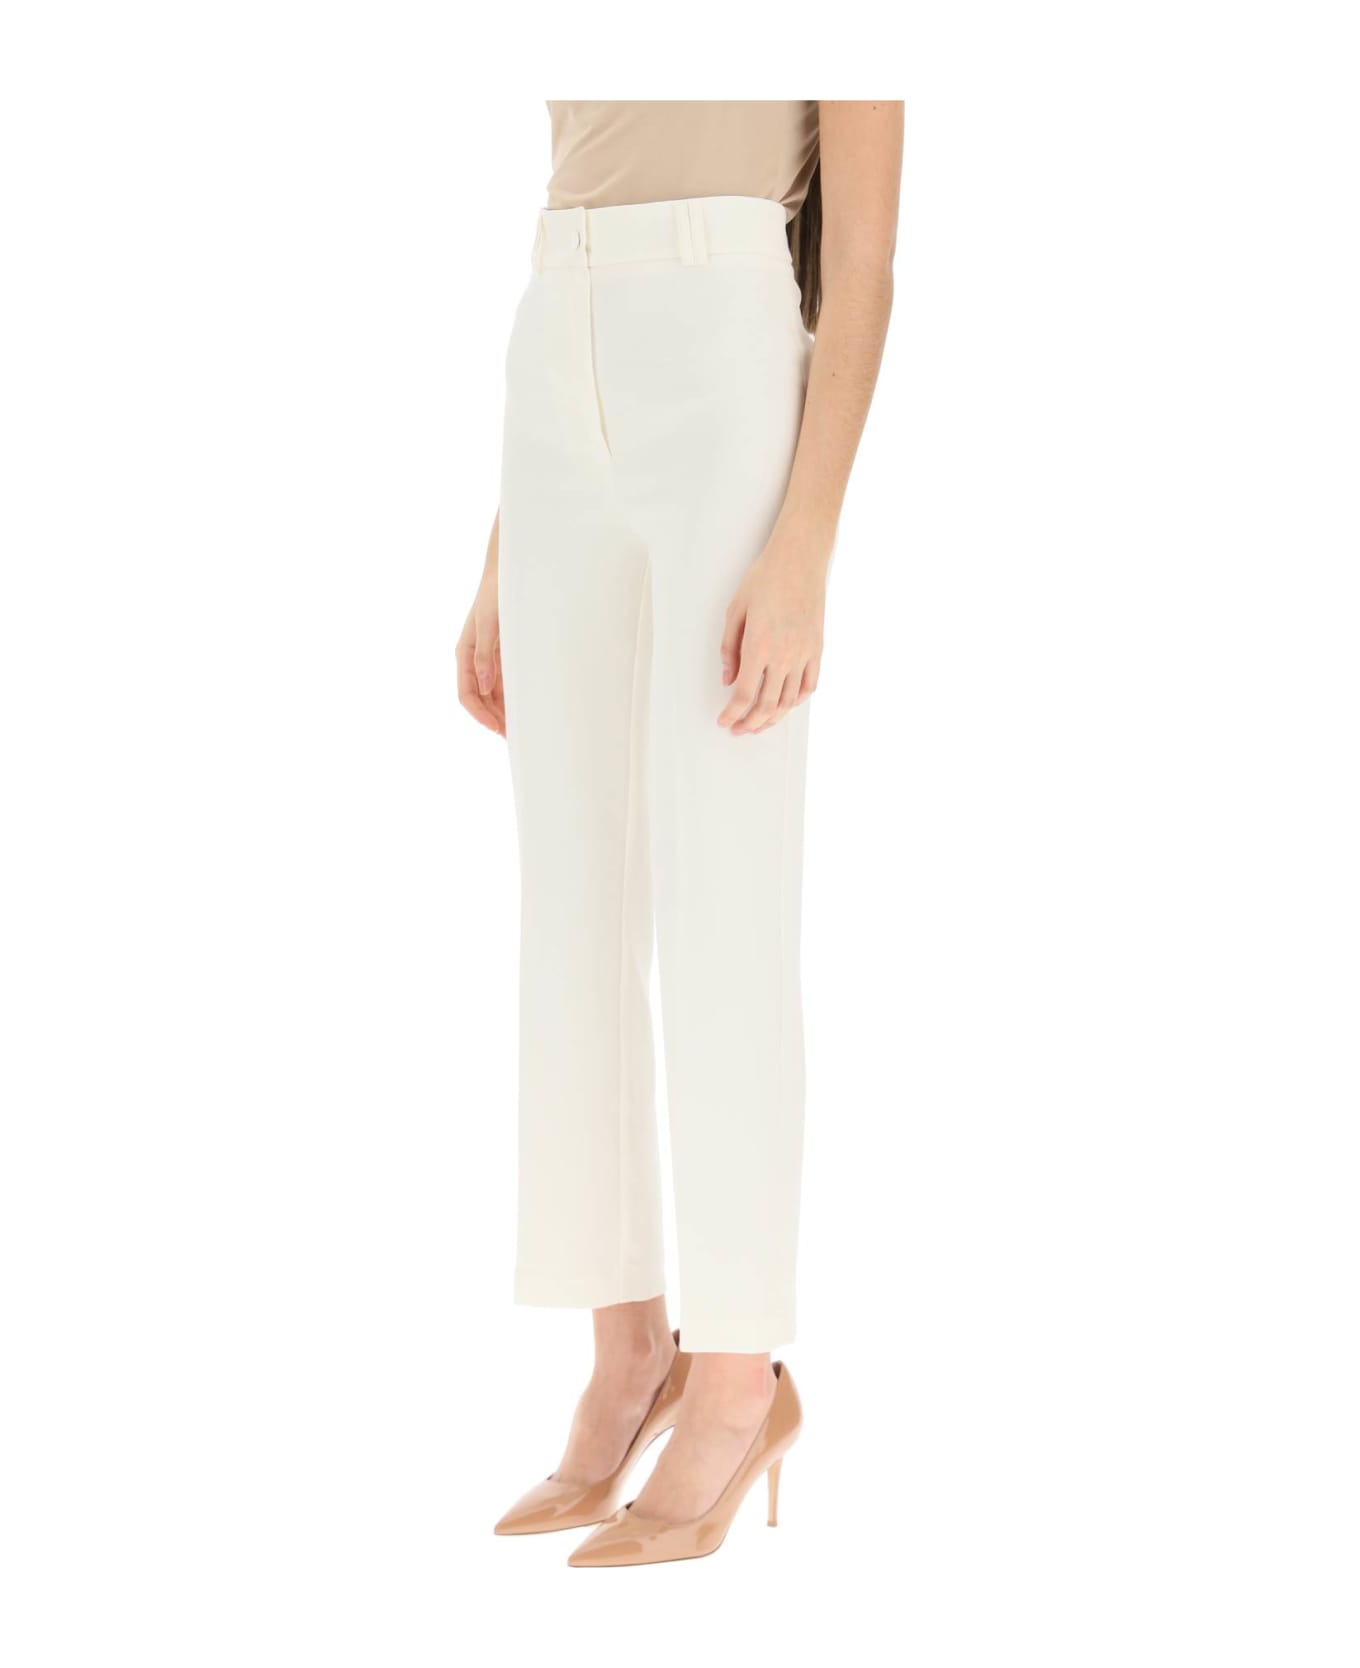 Hebe Studio 'loulou' Cady Rope trousers - CREAM (White)